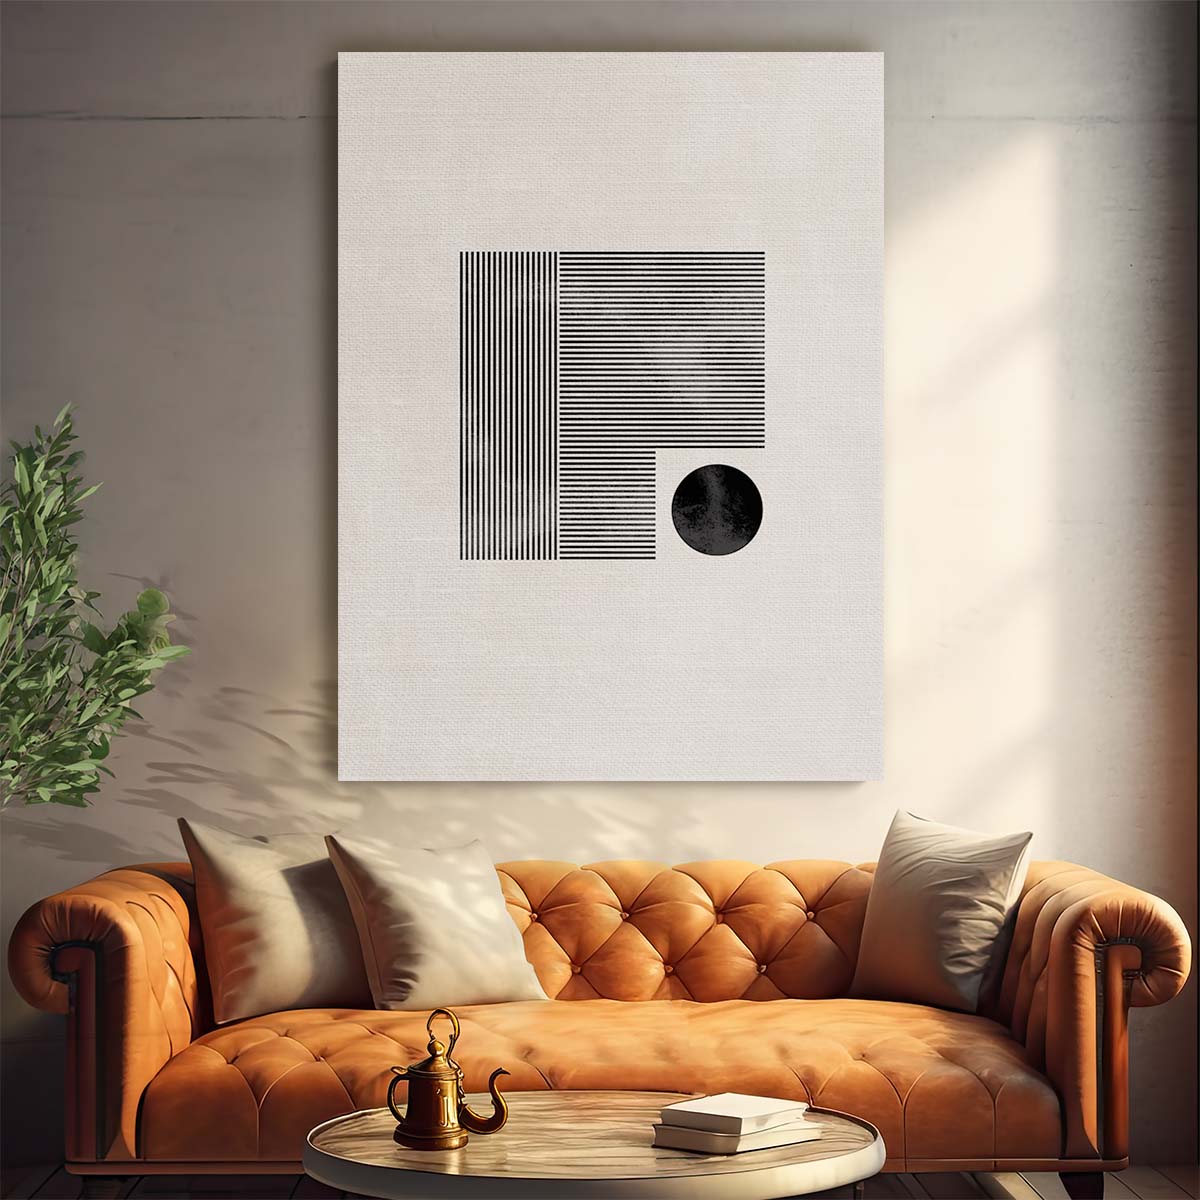 Abstract Geometric Line Art Illustration - Minimalist Square & Circular Shapes by Luxuriance Designs, made in USA